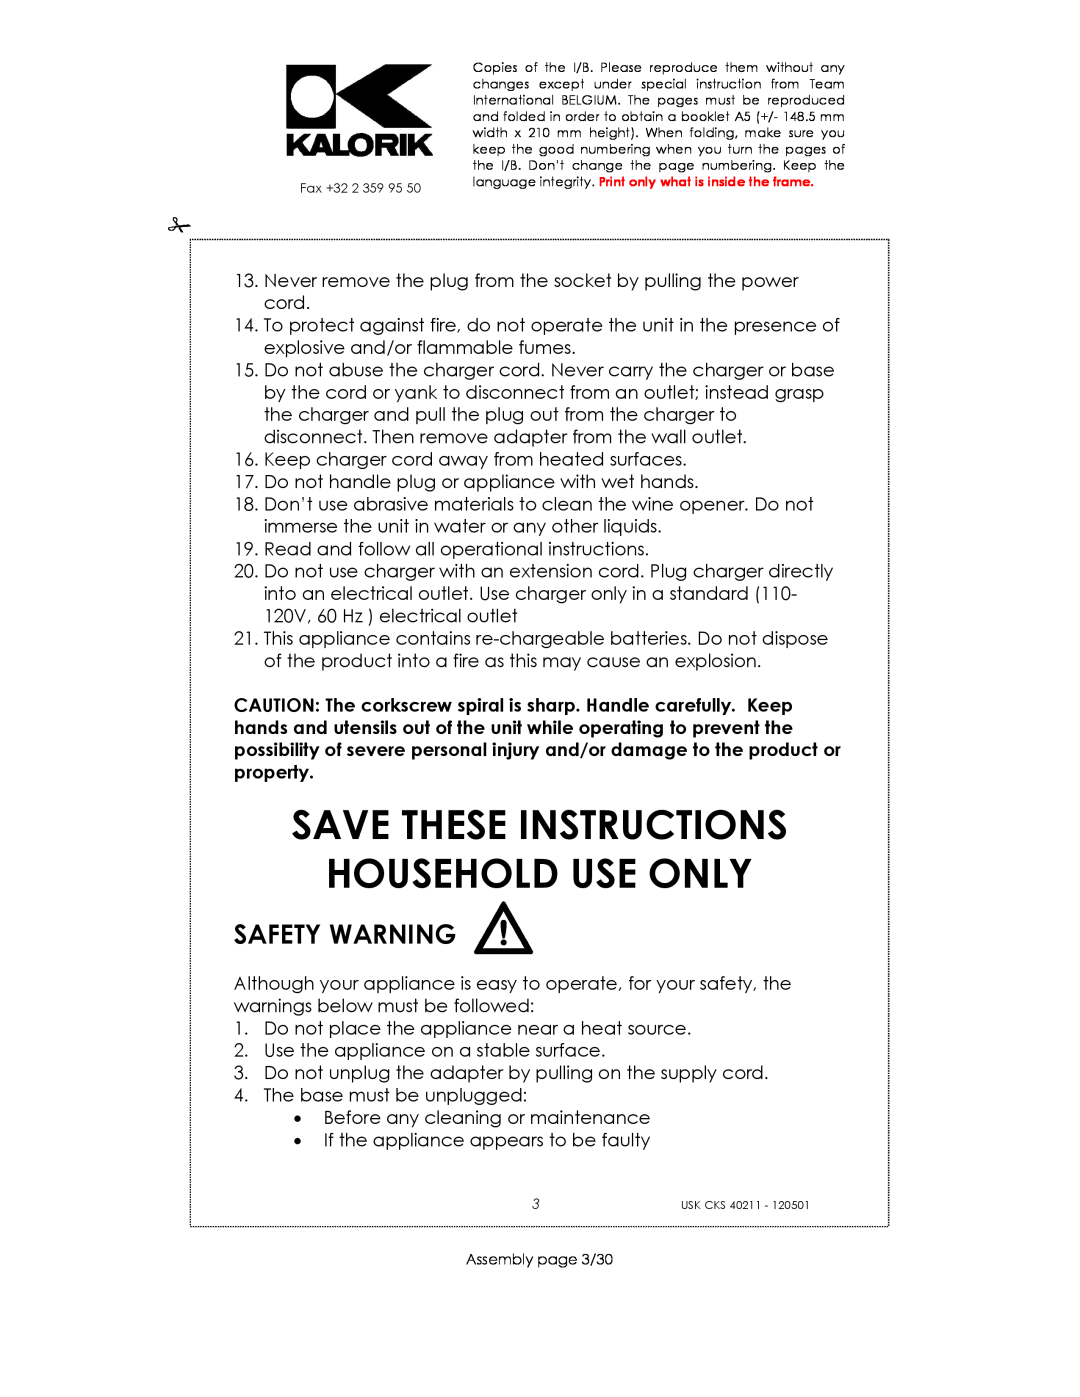 Kalorik CKS 40211 manual Save These Instructions Household Use Only, Safety Warning 